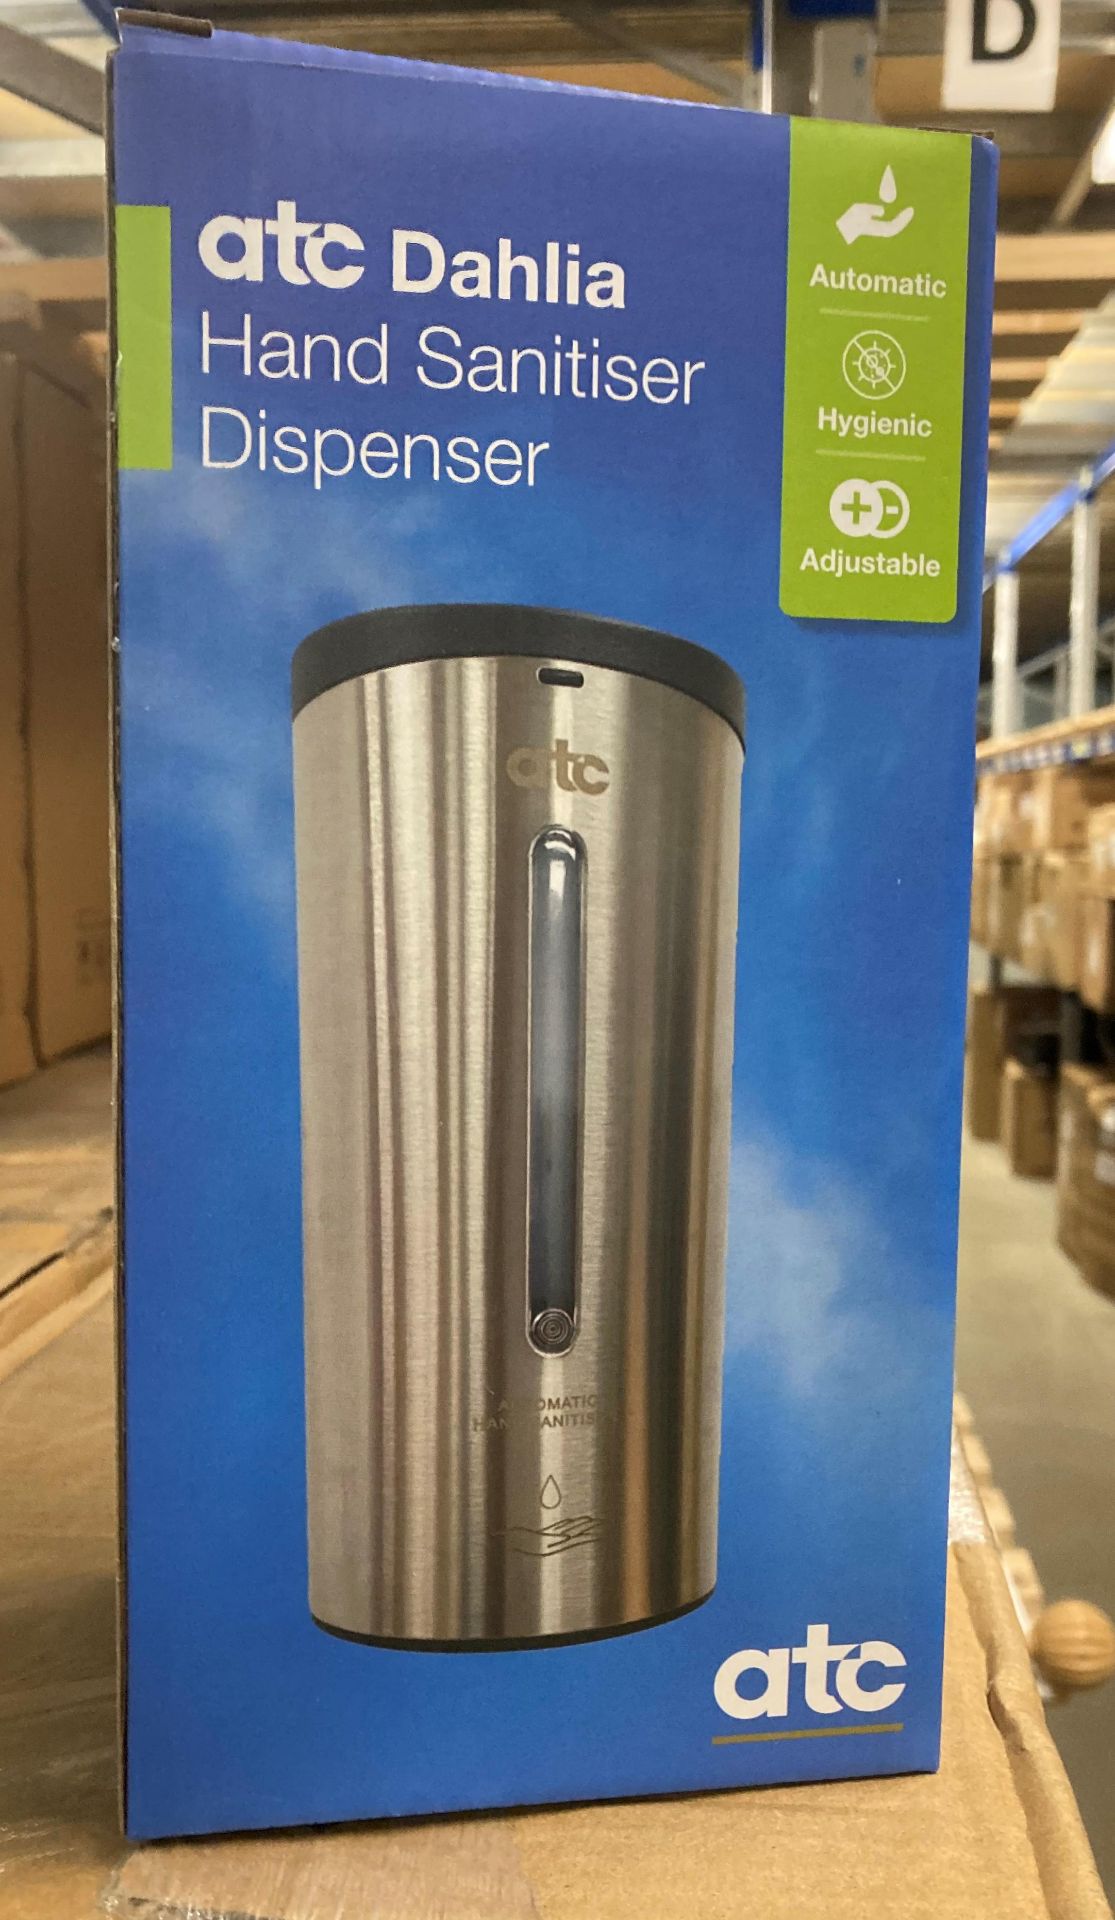 12 x ATC Dahlia Battery Powered Brushed Stainless Steel Soap/Sanitiser Dispensers (Boxed New Stock